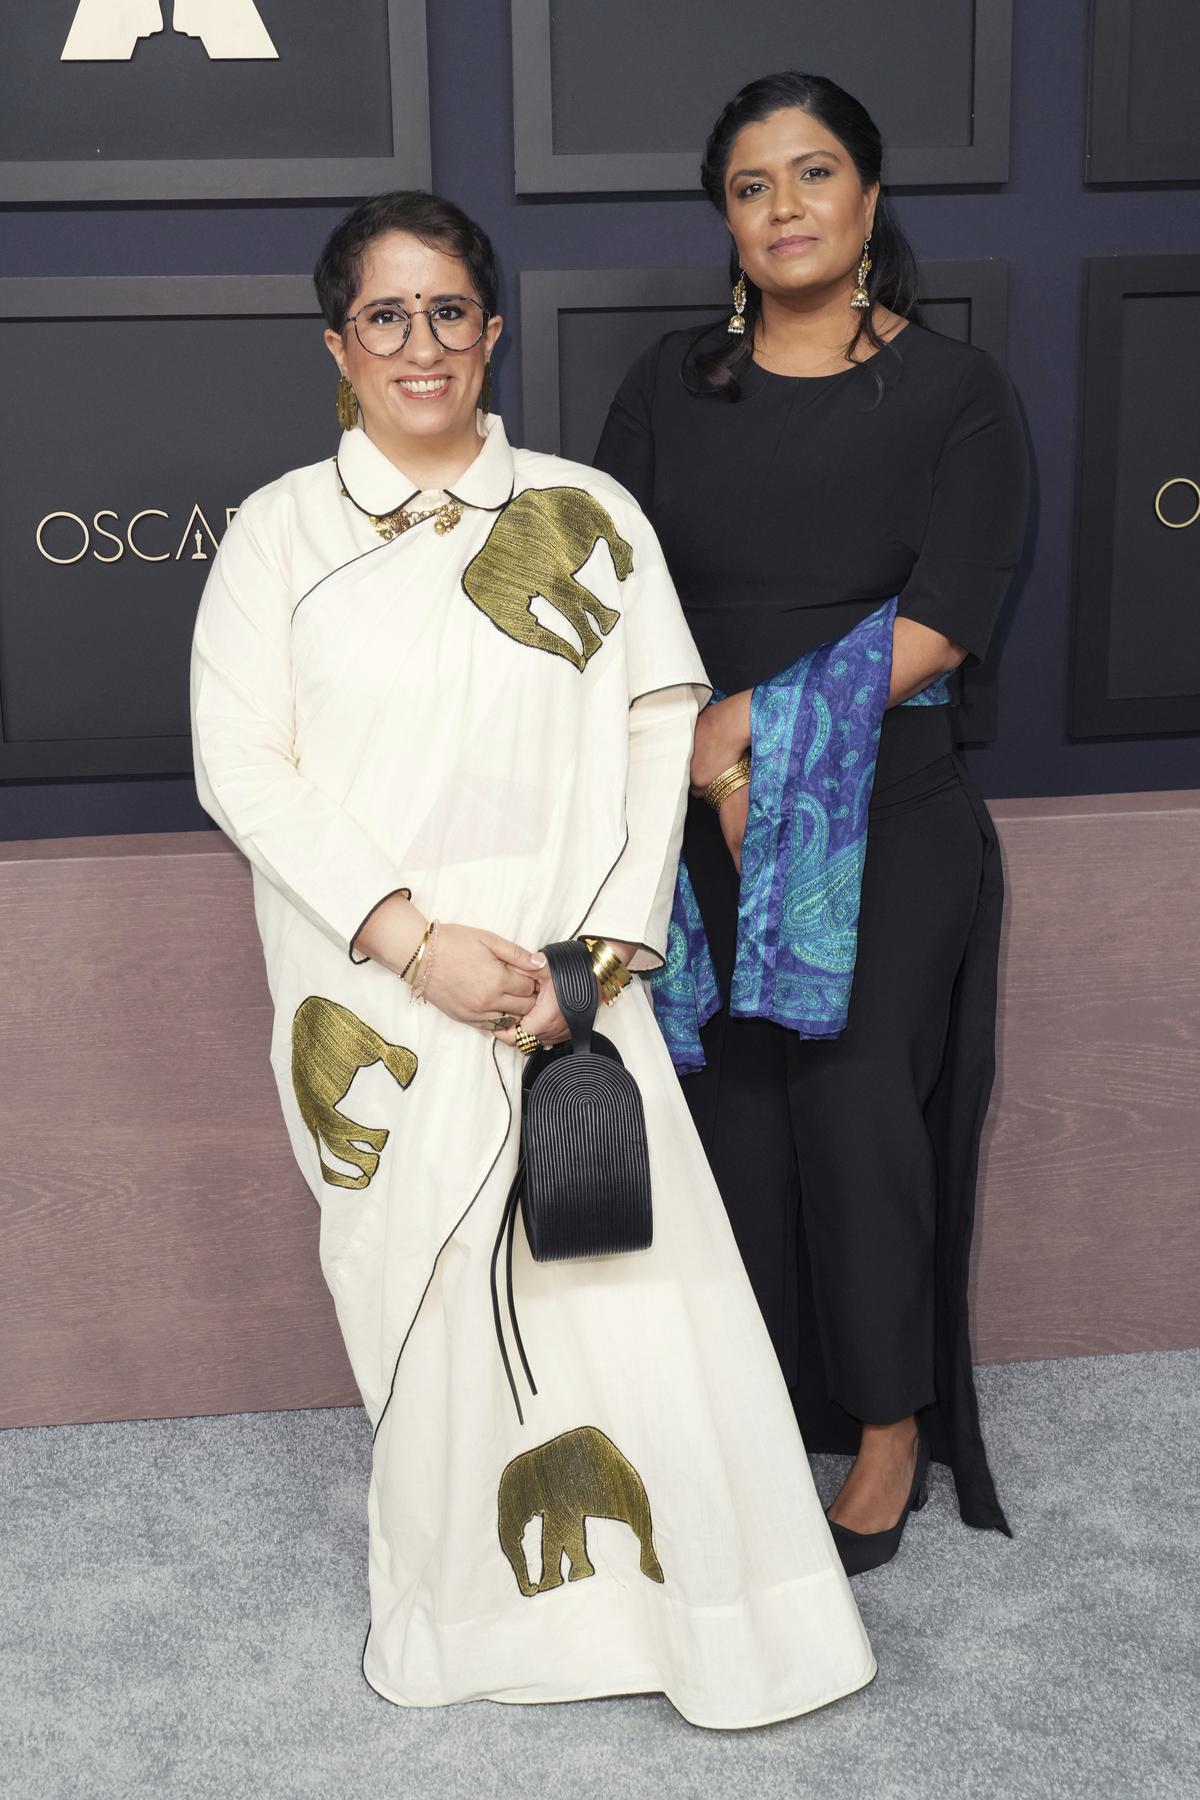 Guneet Monga (left) and Kartiki Gonsalves, producer and director, respectively, of the Oscar-nominated ‘The Elephant Whisperers’, at the 95th Academy Awards Nominees Luncheon in California on February 13, 2023.